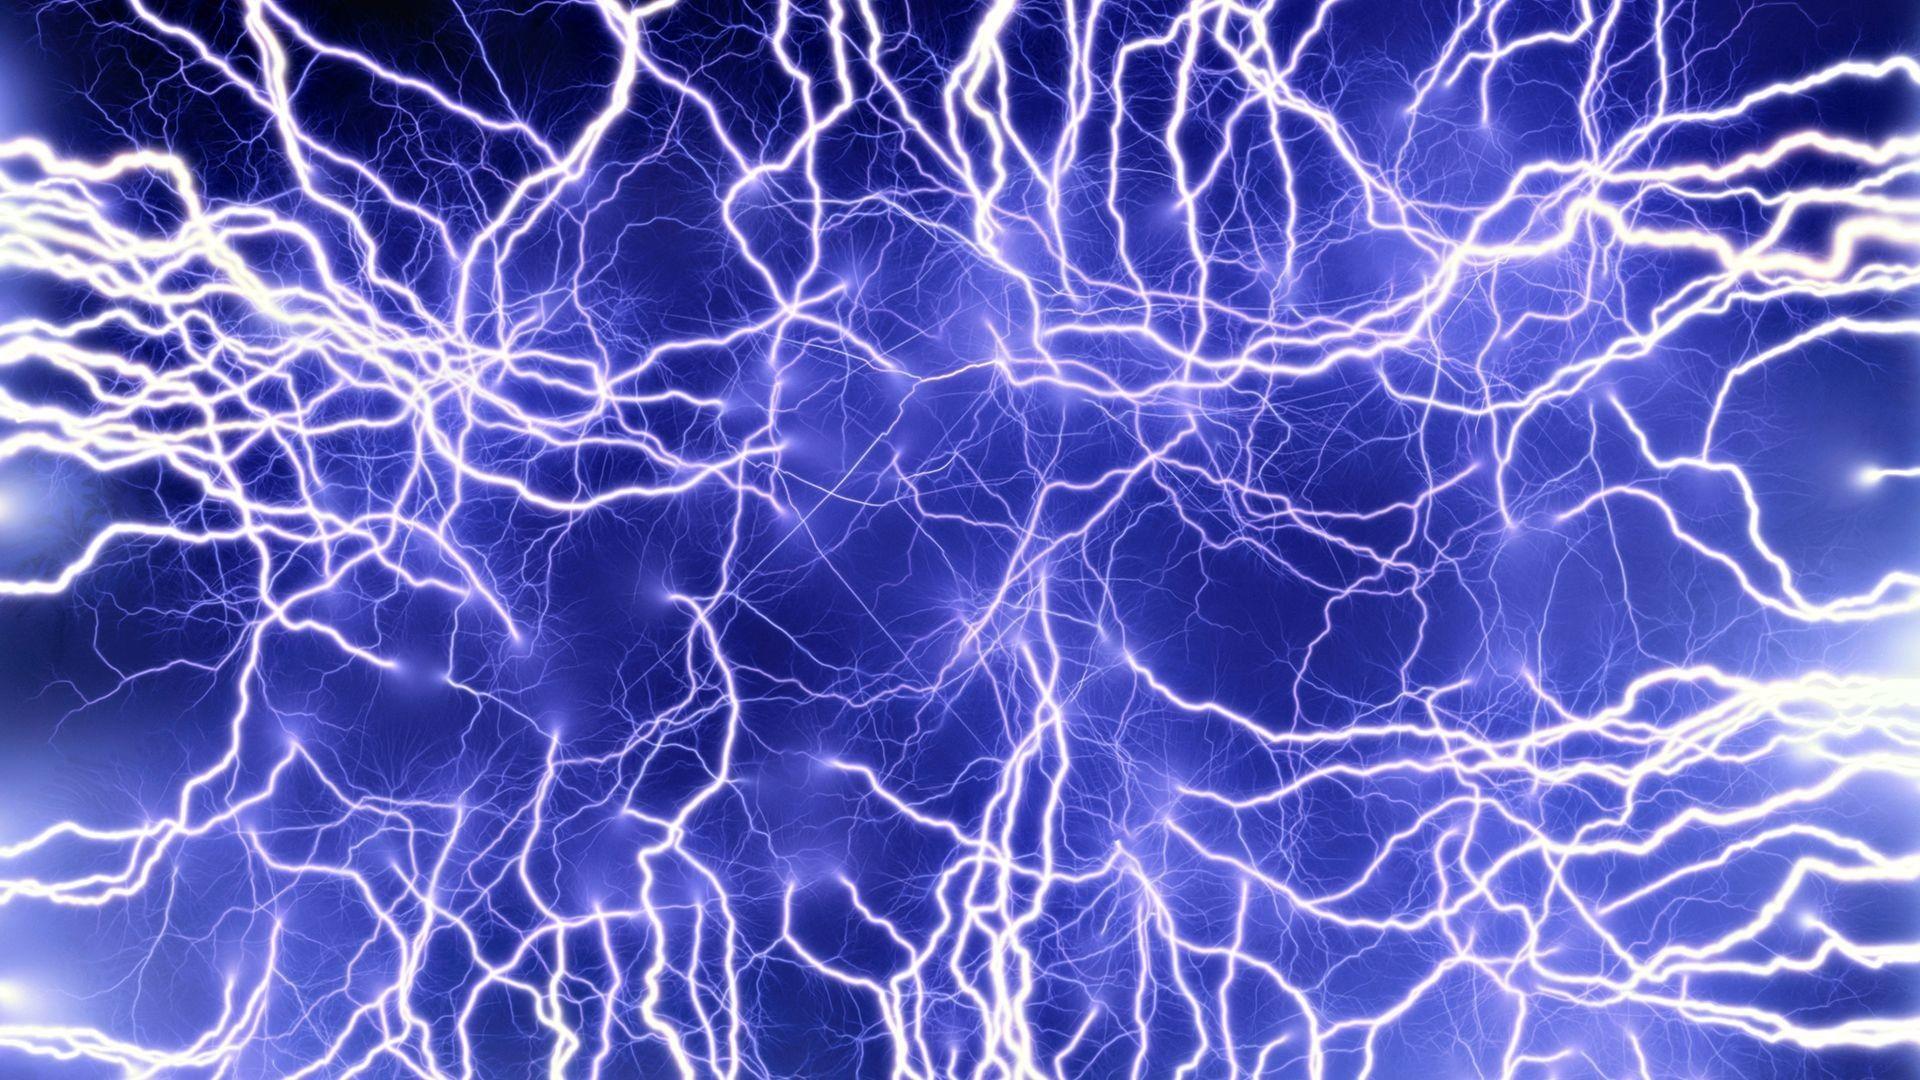 Electricity Wallpapers - Top Free Electricity Backgrounds ...